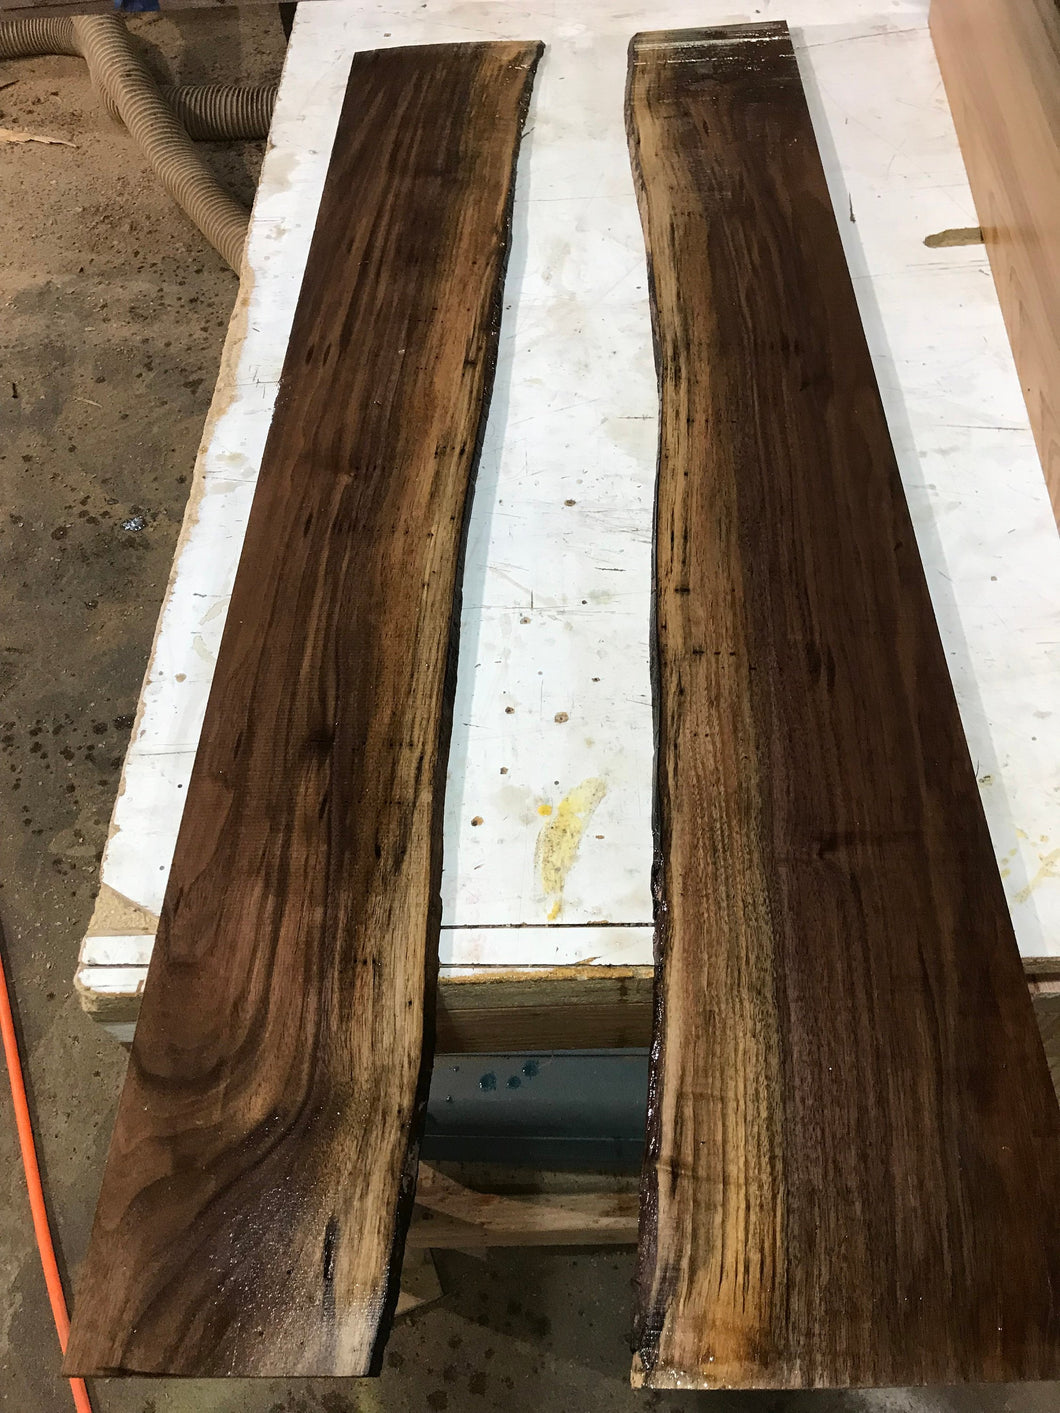 Pair of 1/4" Live Edge Walnut Slabs (Milled for Mirror edges)